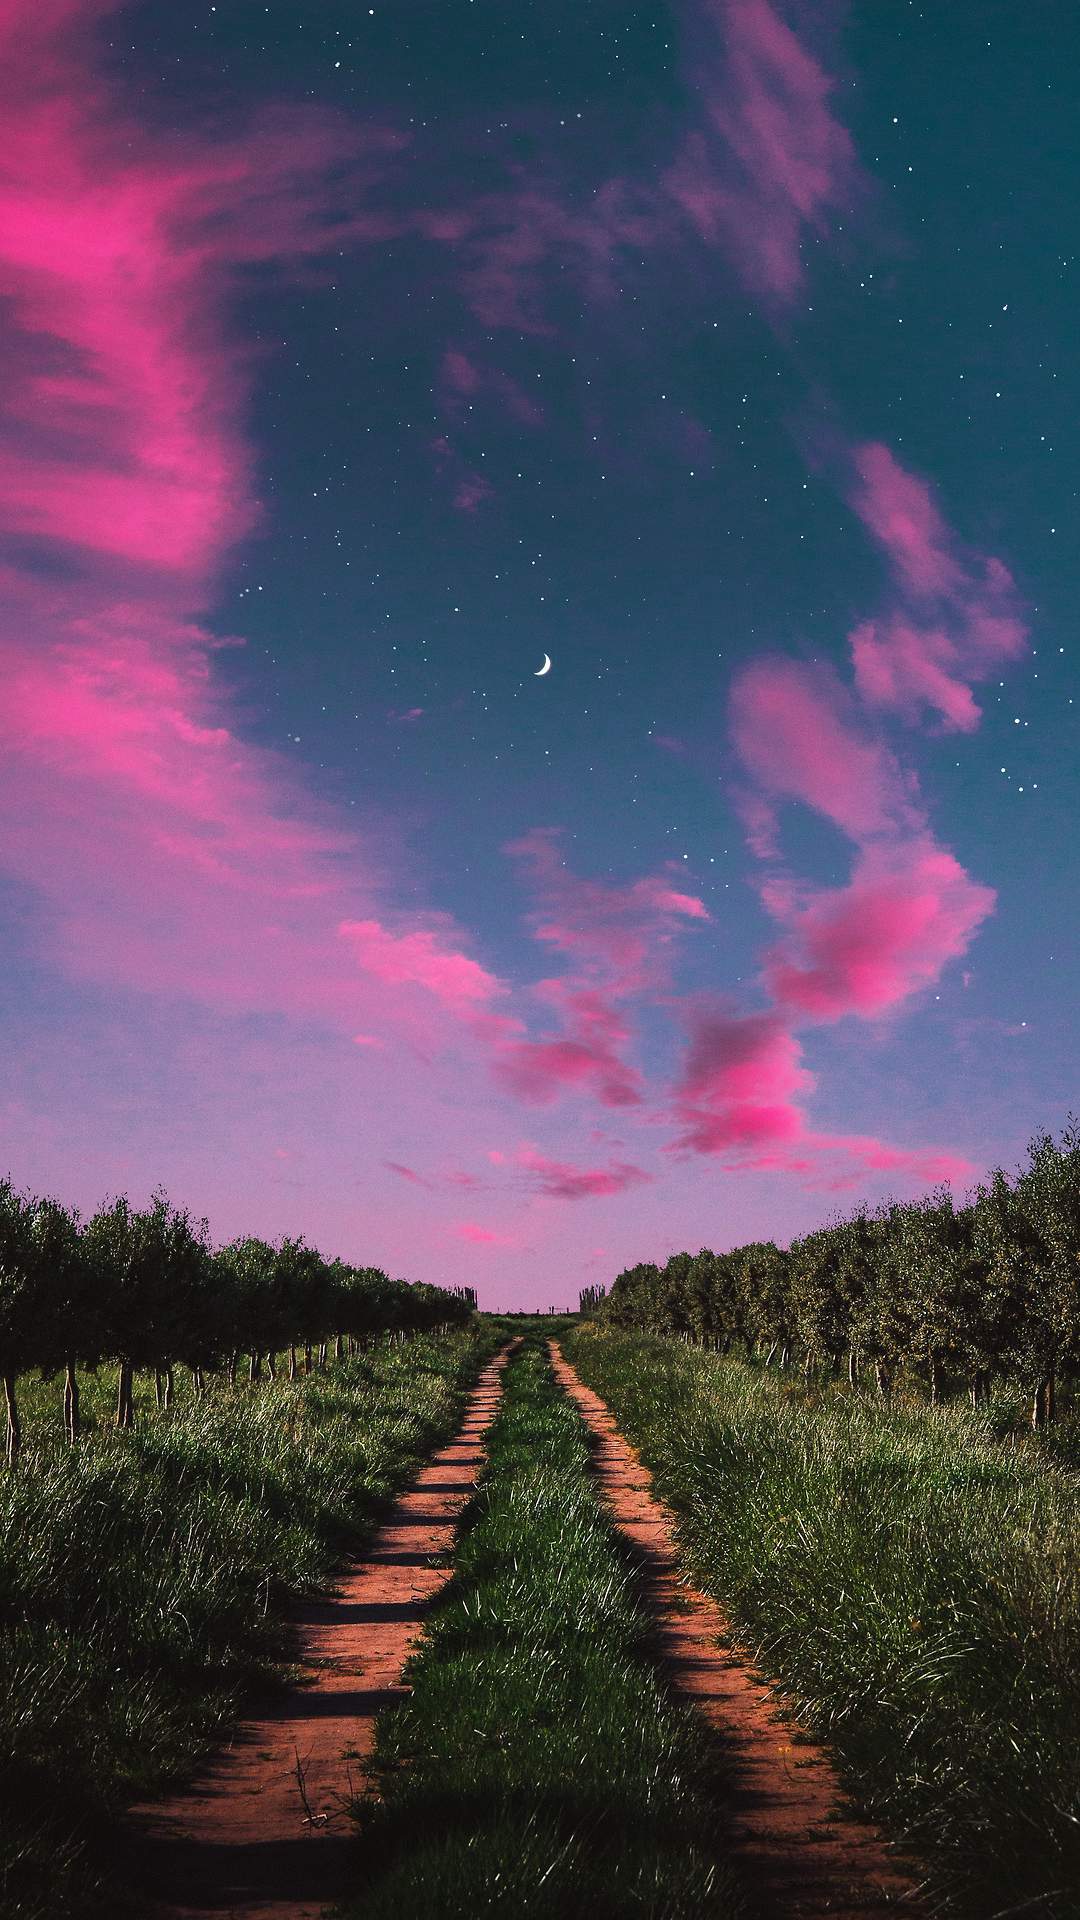 Green Nature Path Moon Starry Sky IPhone Wallpaper Wallpaper : iPhone Wallpaper